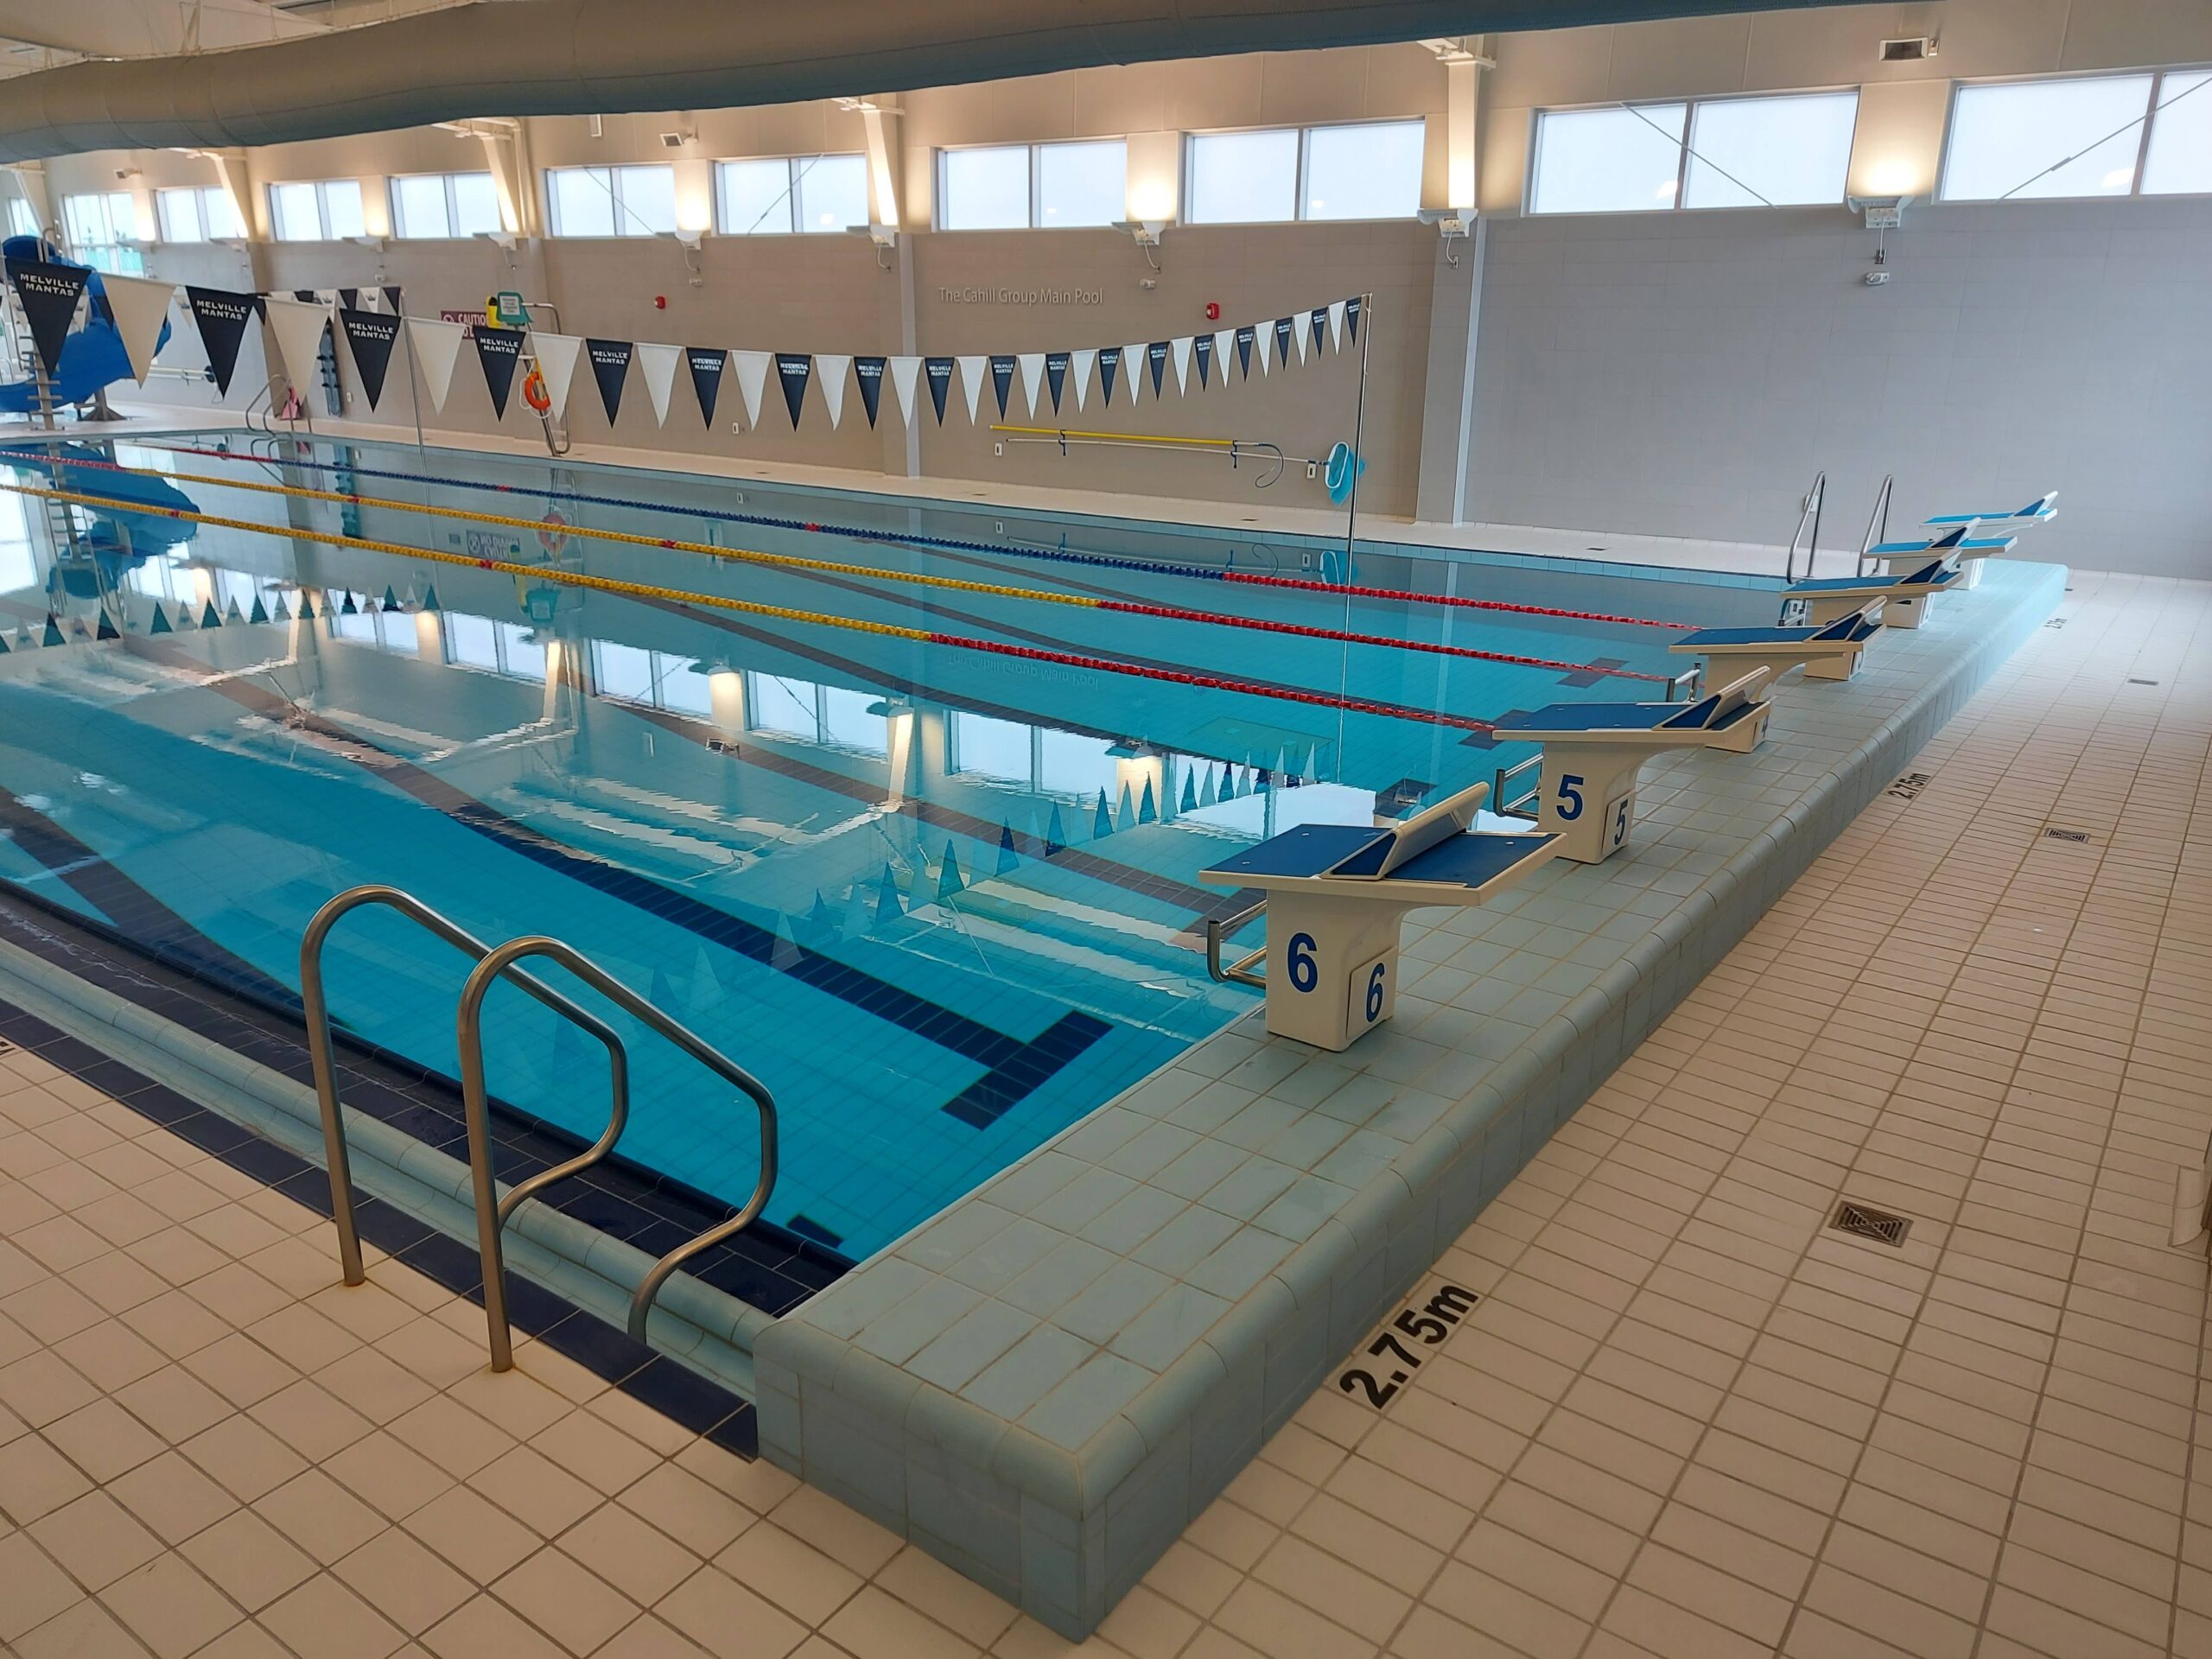 a view of the deep end of a pool, showing the diving blocks